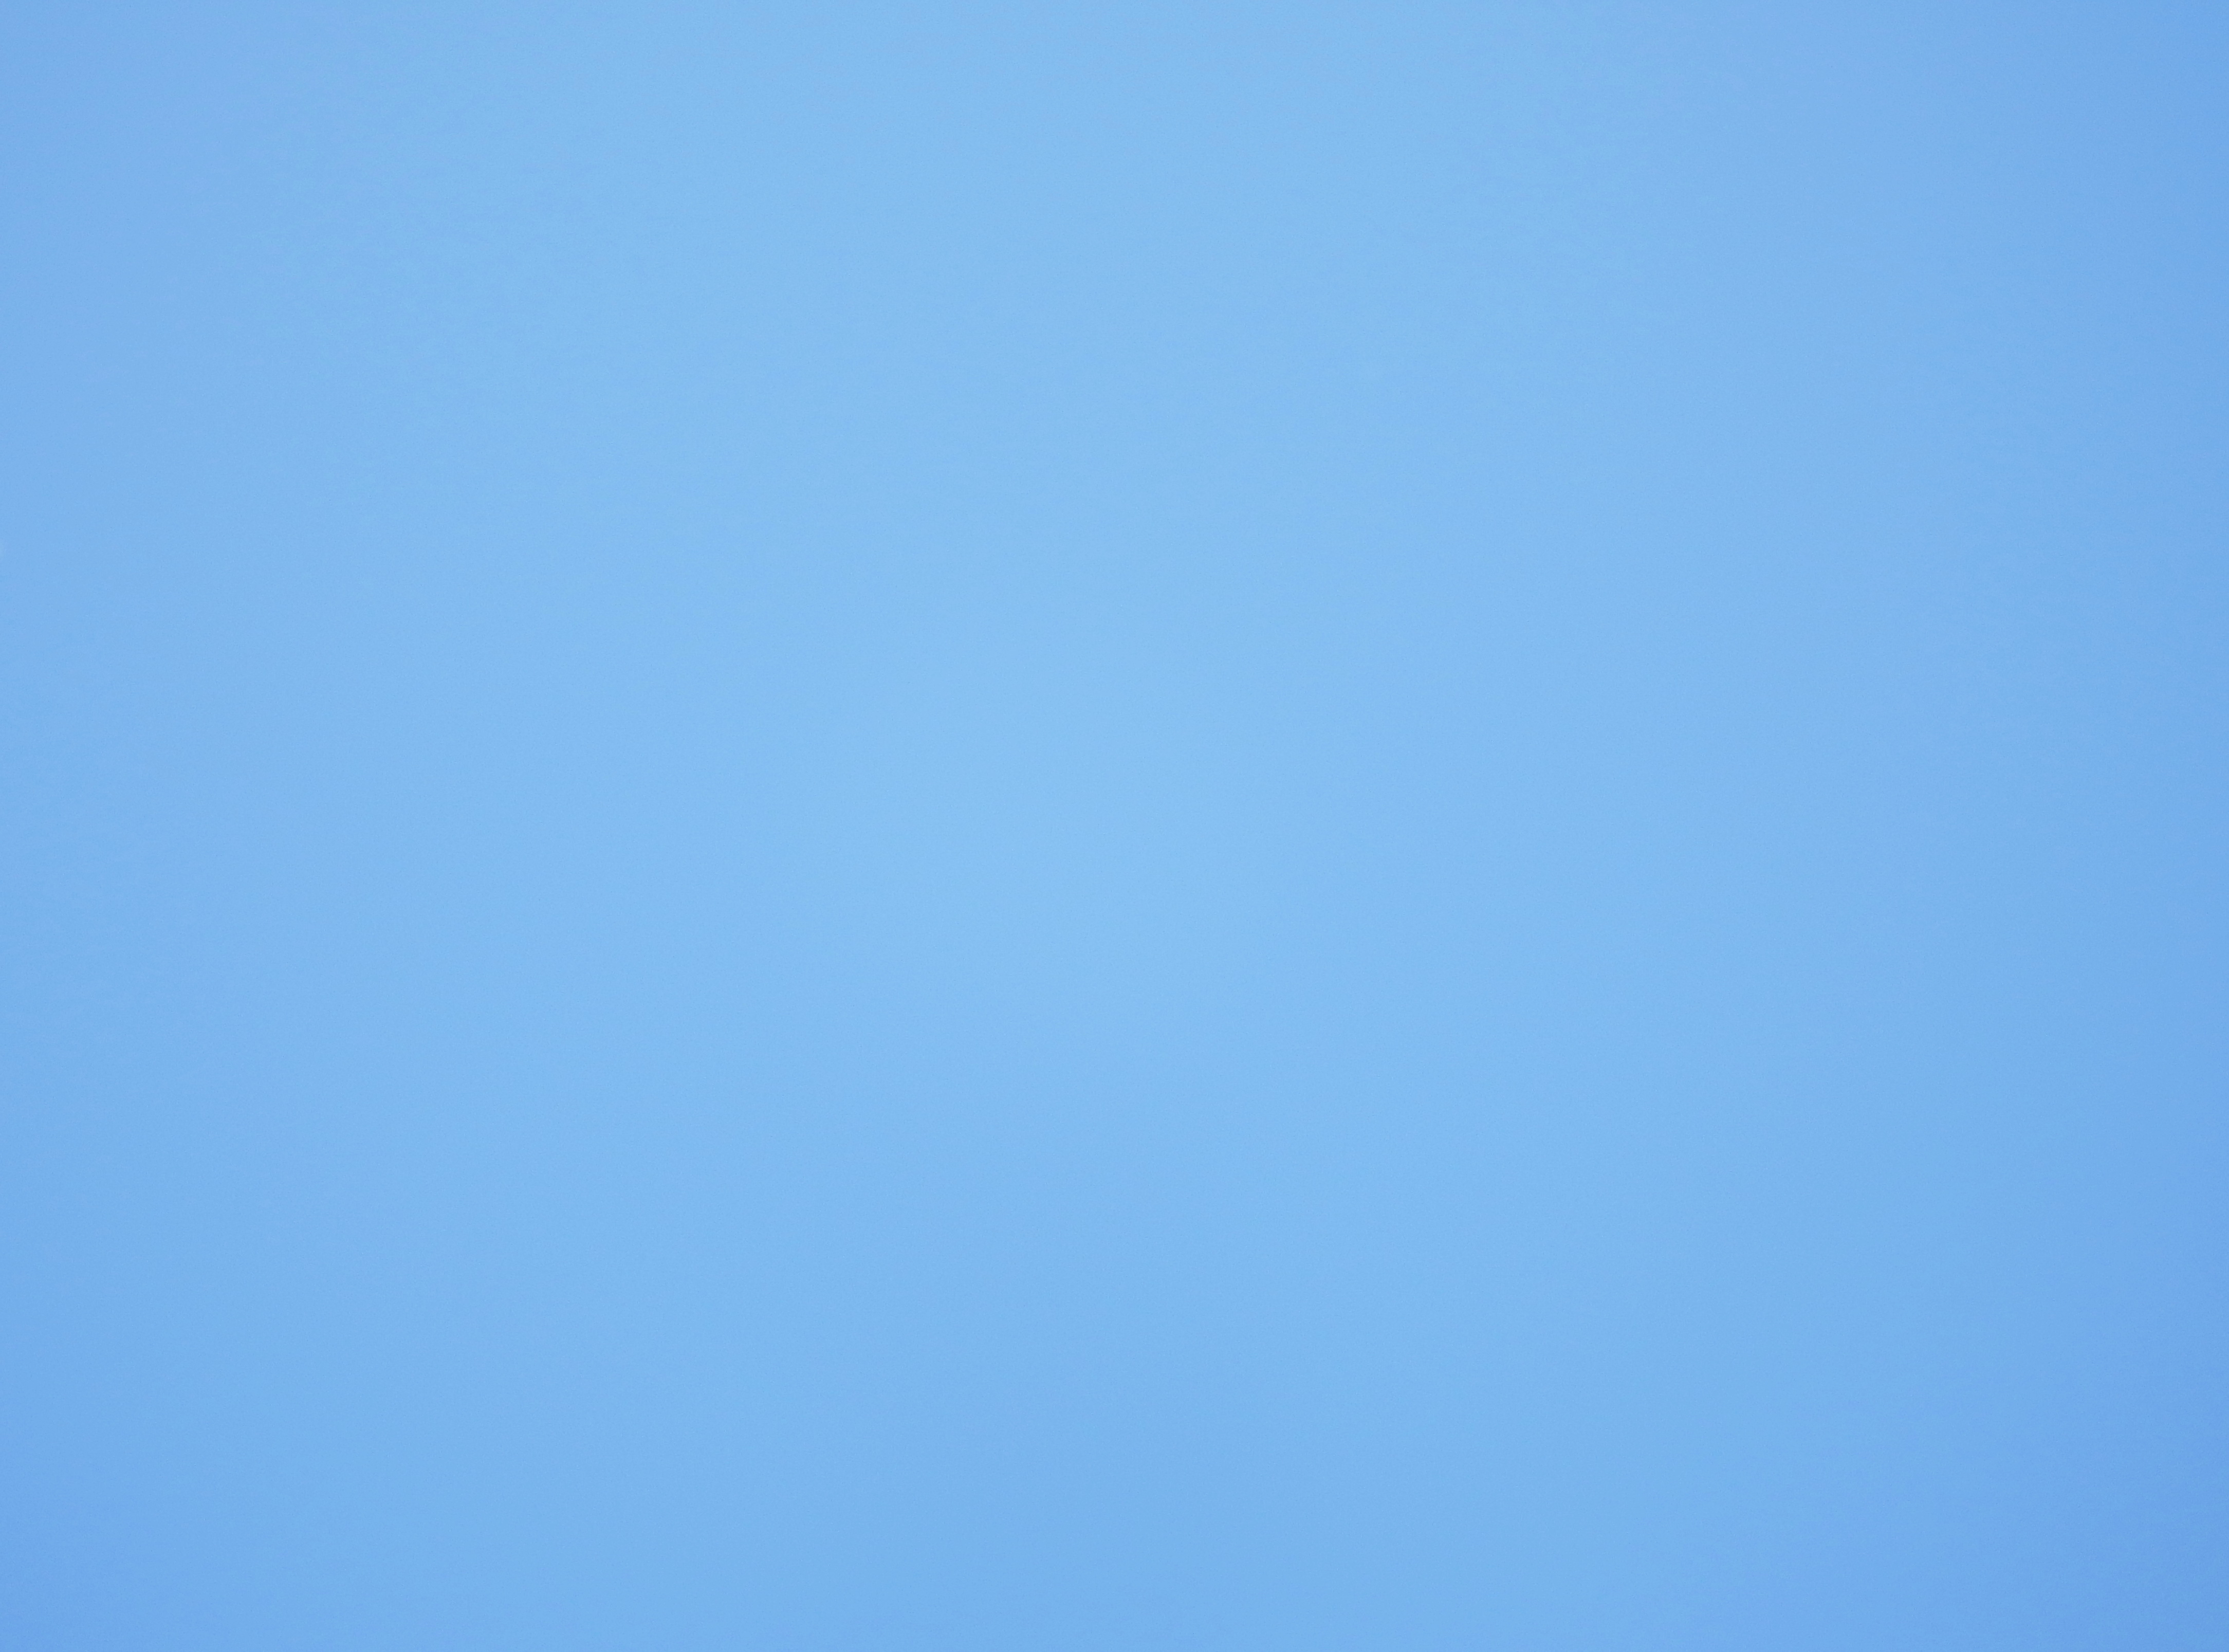 Free photo: Cloudless Blue Sky Background - Blank, Blue ...